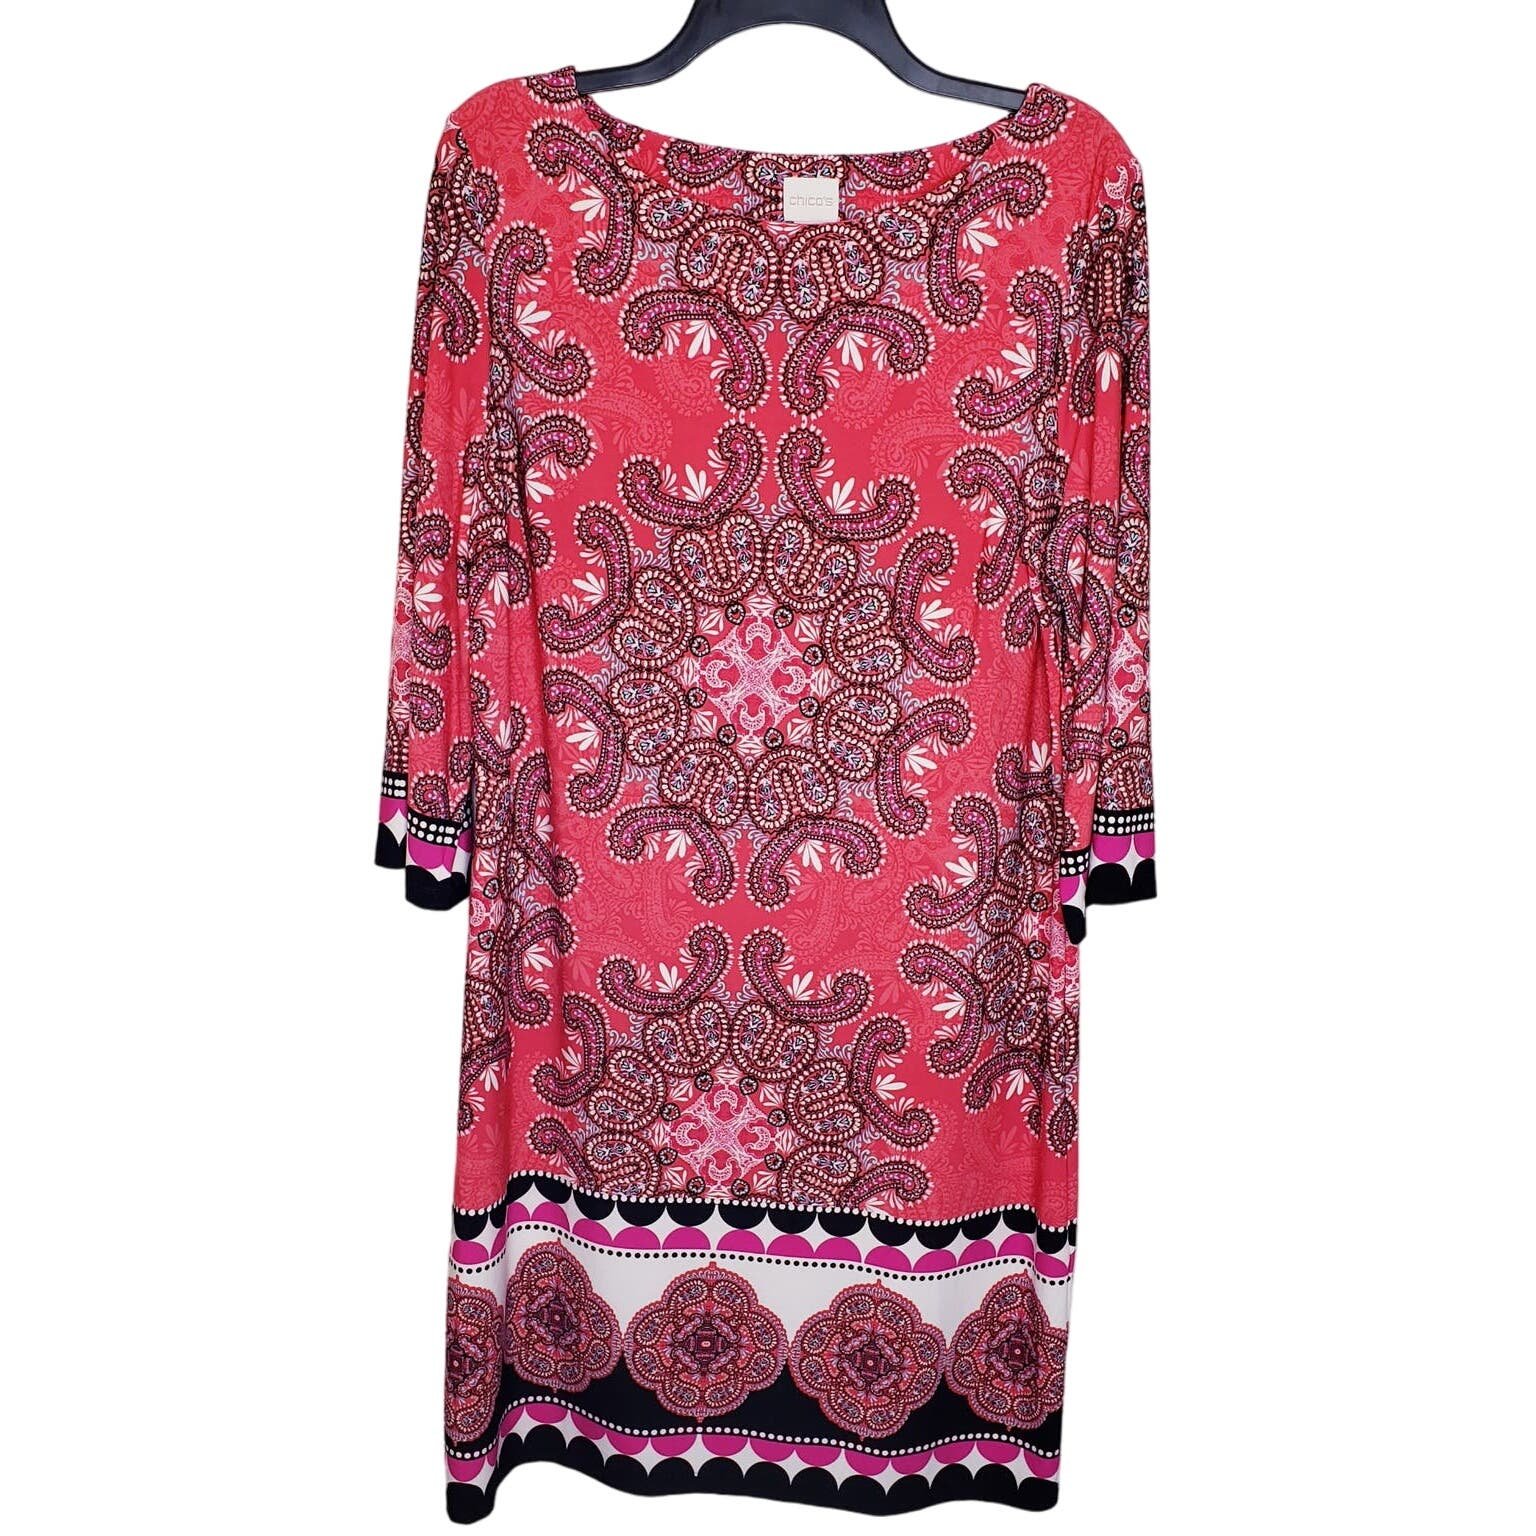 Buy CHICOS Women´s Size 2 Red & Black 3/4 Sleeve Paisley Shift Dress in VGUC PDyd8ZRse Online Exclusive